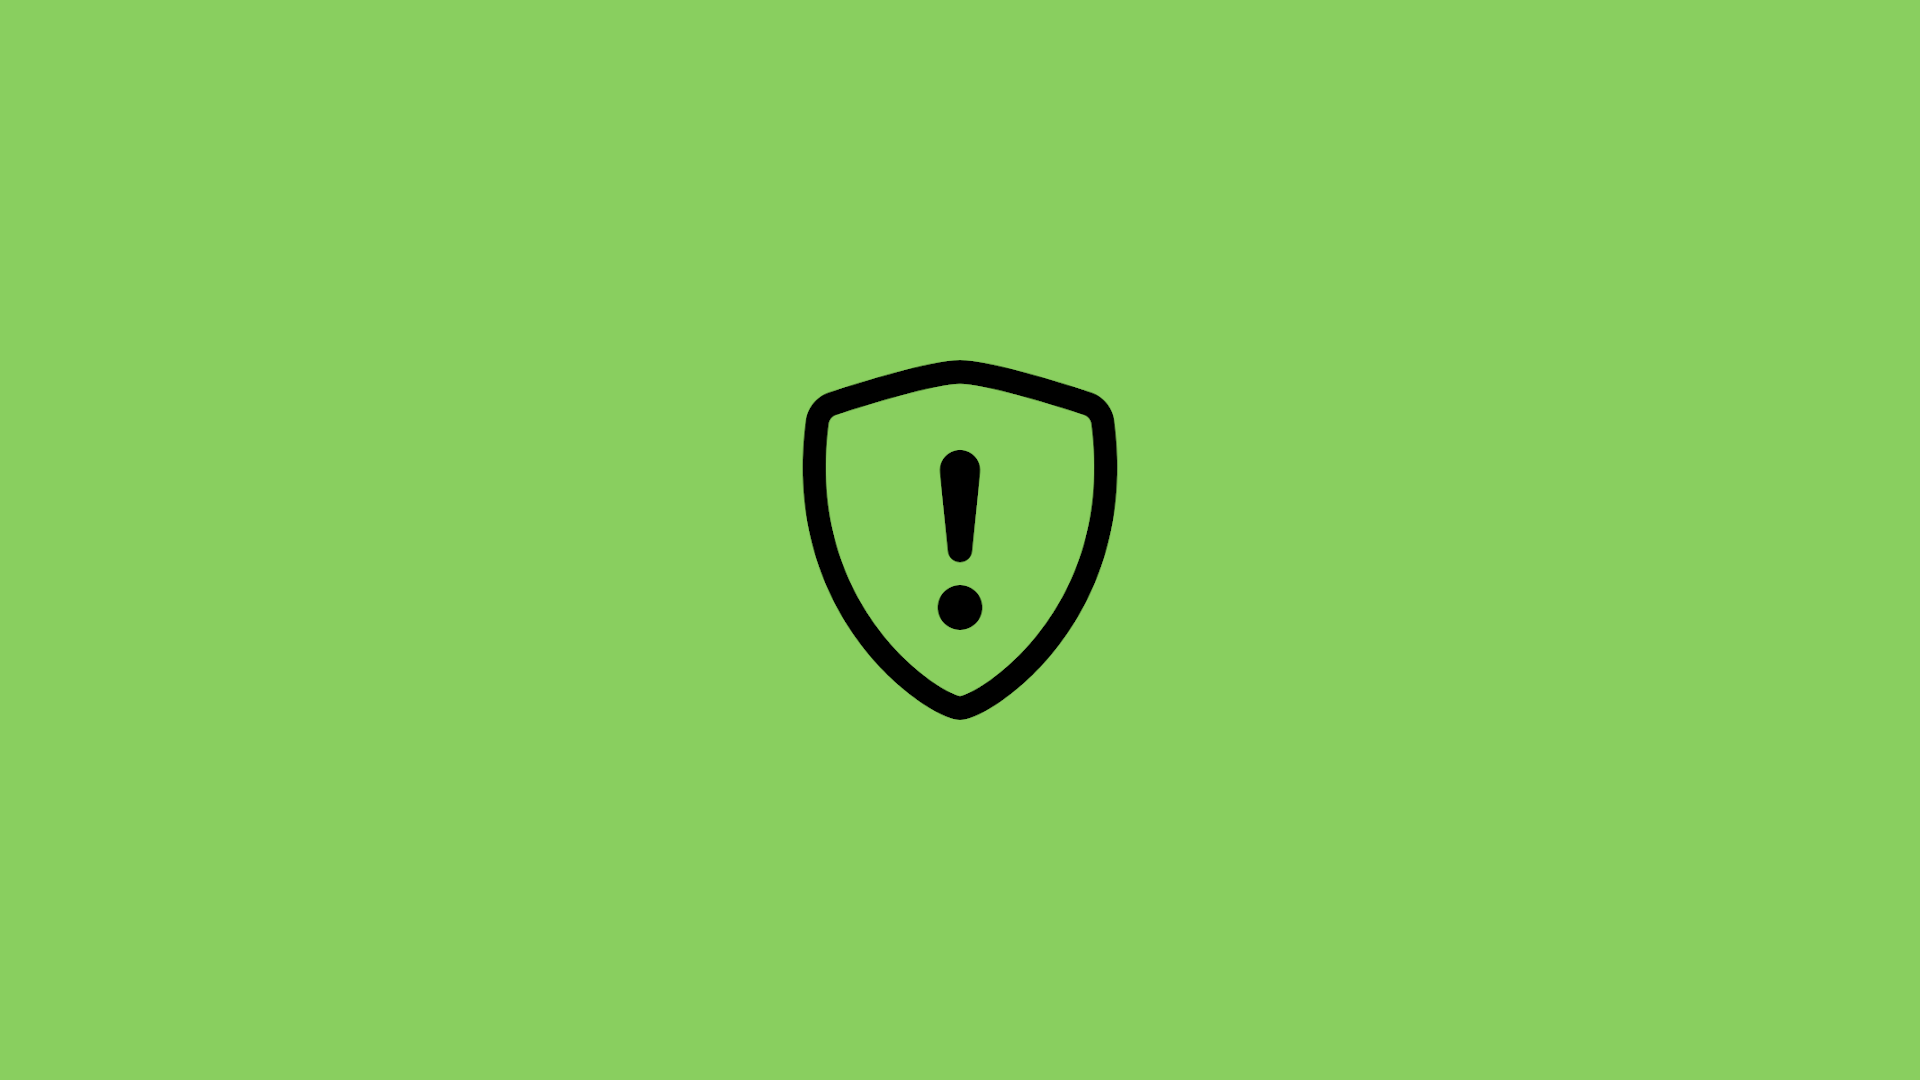 shield icon with exclamation mark on green background